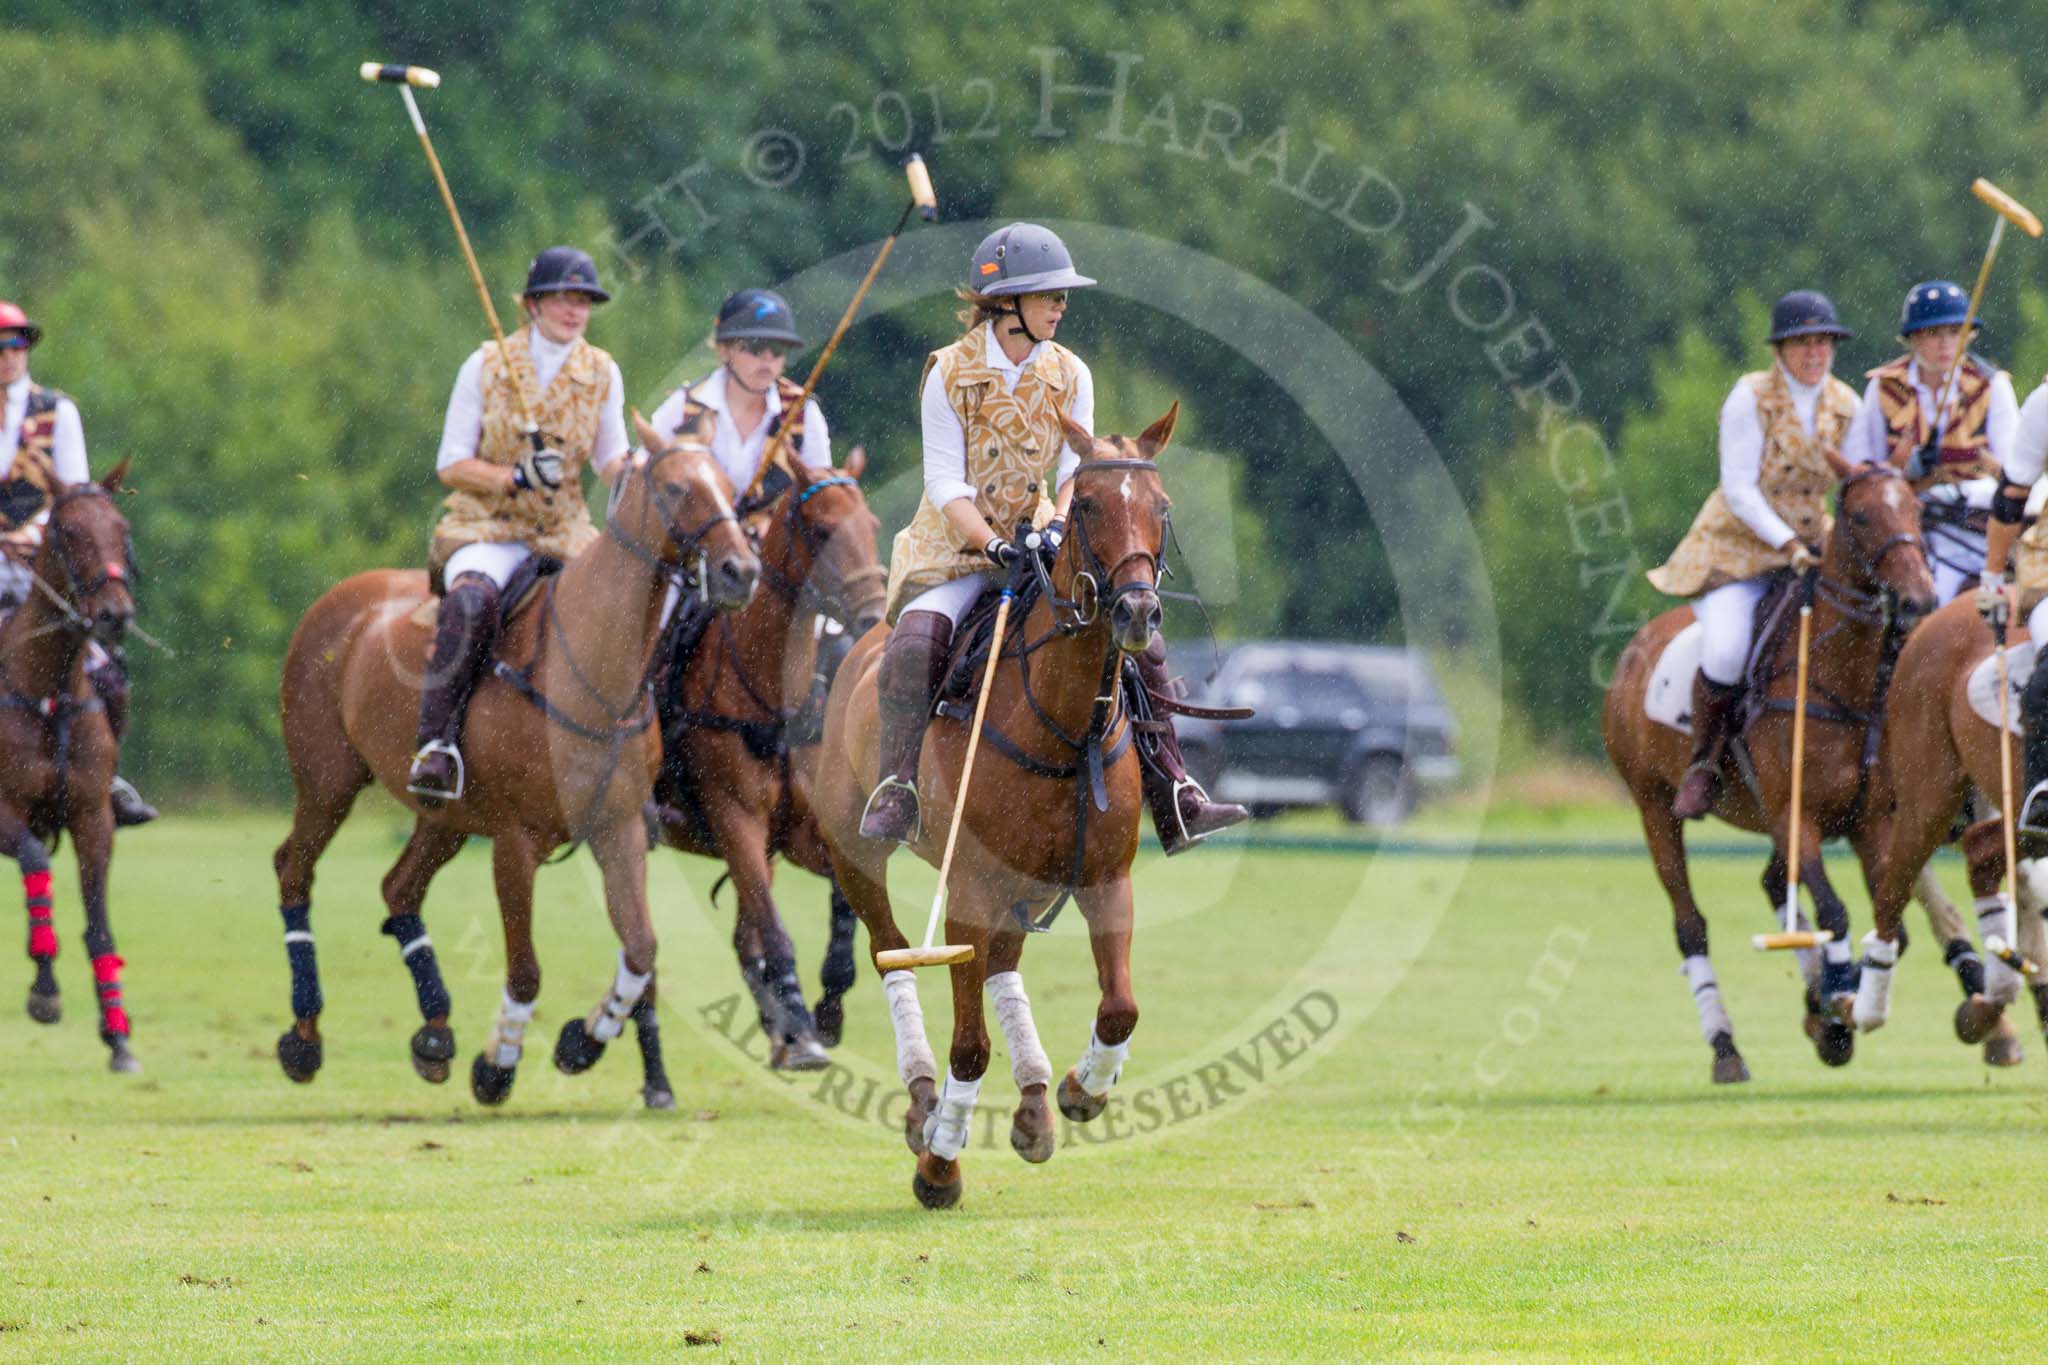 7th Heritage Polo Cup semi-finals: Emma Boers riding back to centre - The Amazons of Polo sponsored by Polistas..
Hurtwood Park Polo Club,
Ewhurst Green,
Surrey,
United Kingdom,
on 04 August 2012 at 13:28, image #137